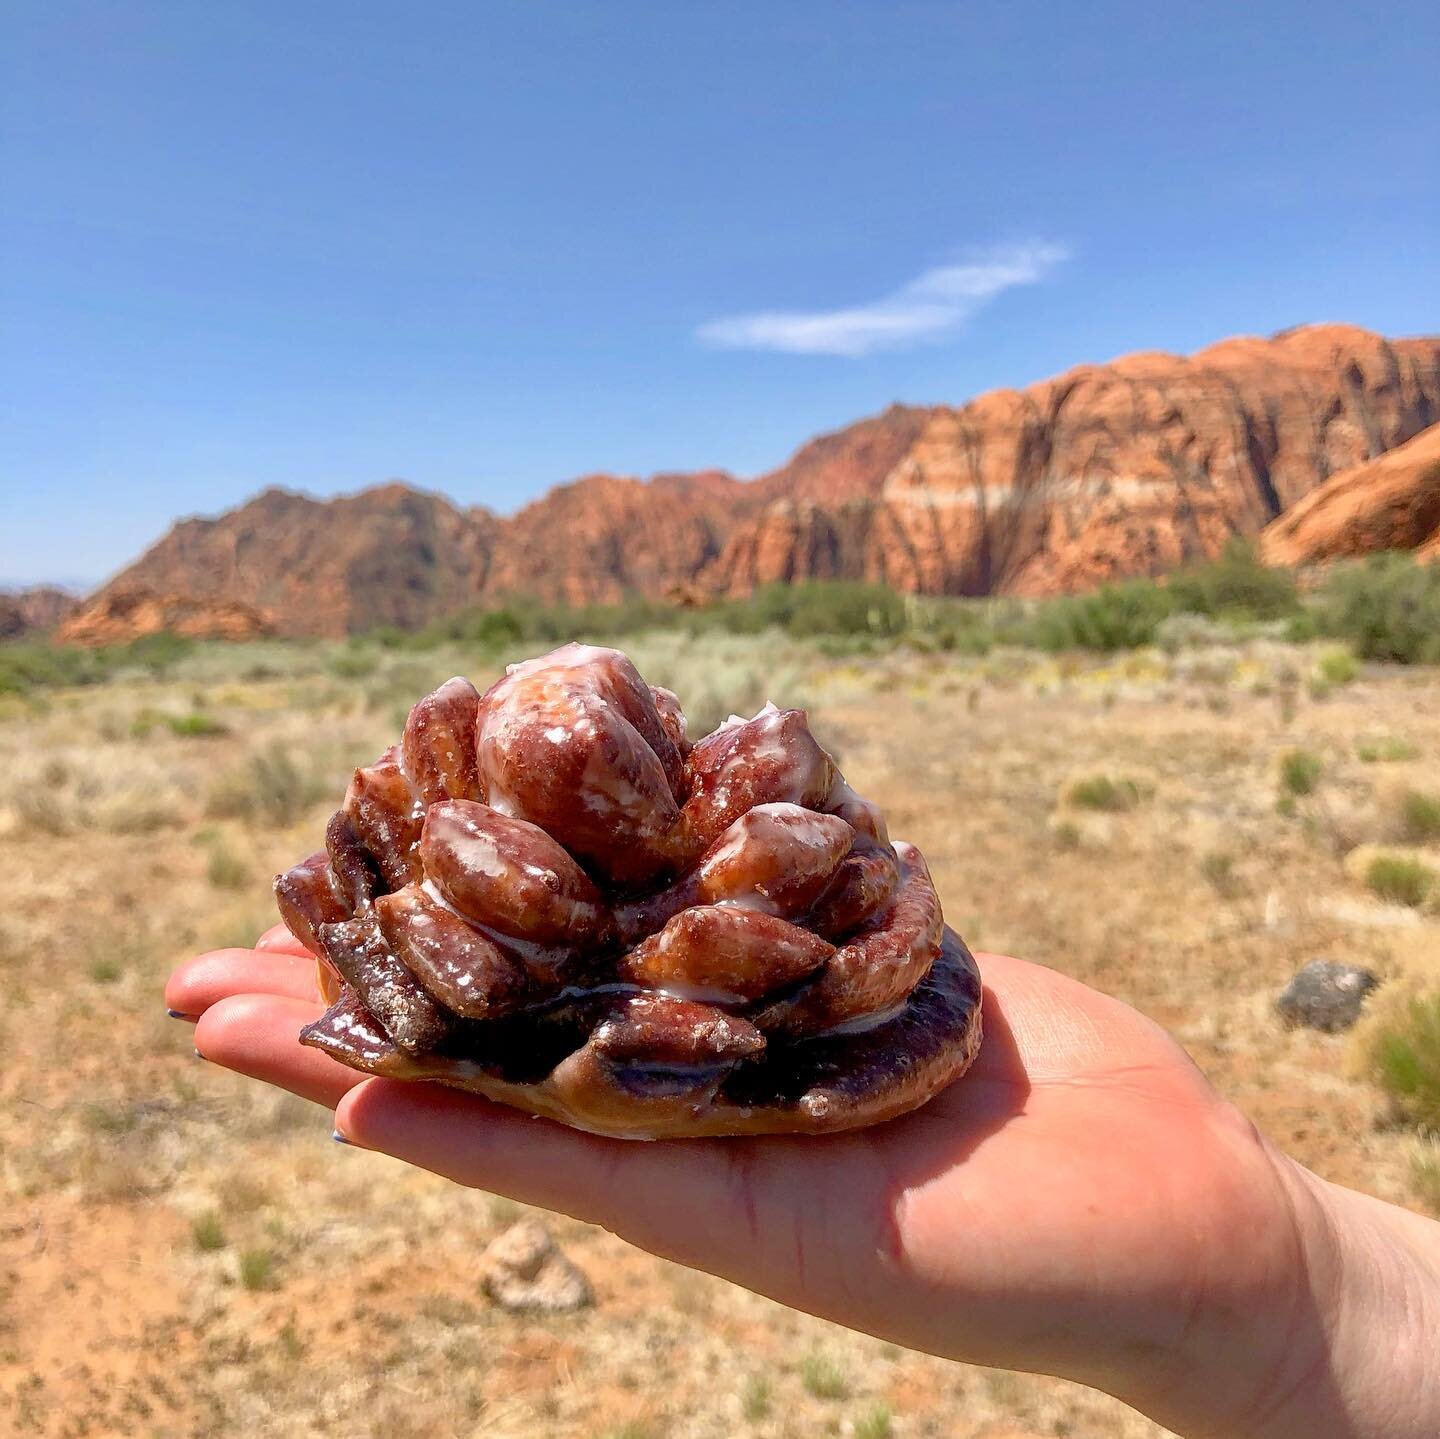 Donuts in the wild edition.⁣
⁣⁣
⁣Donuts present by @daylight.donuts.stg. First off, New England shops need to steal this pine cone shaped cinnamon bun idea. Second, this bear claw was no average bear claw. This guy was filled with raspberry and chees